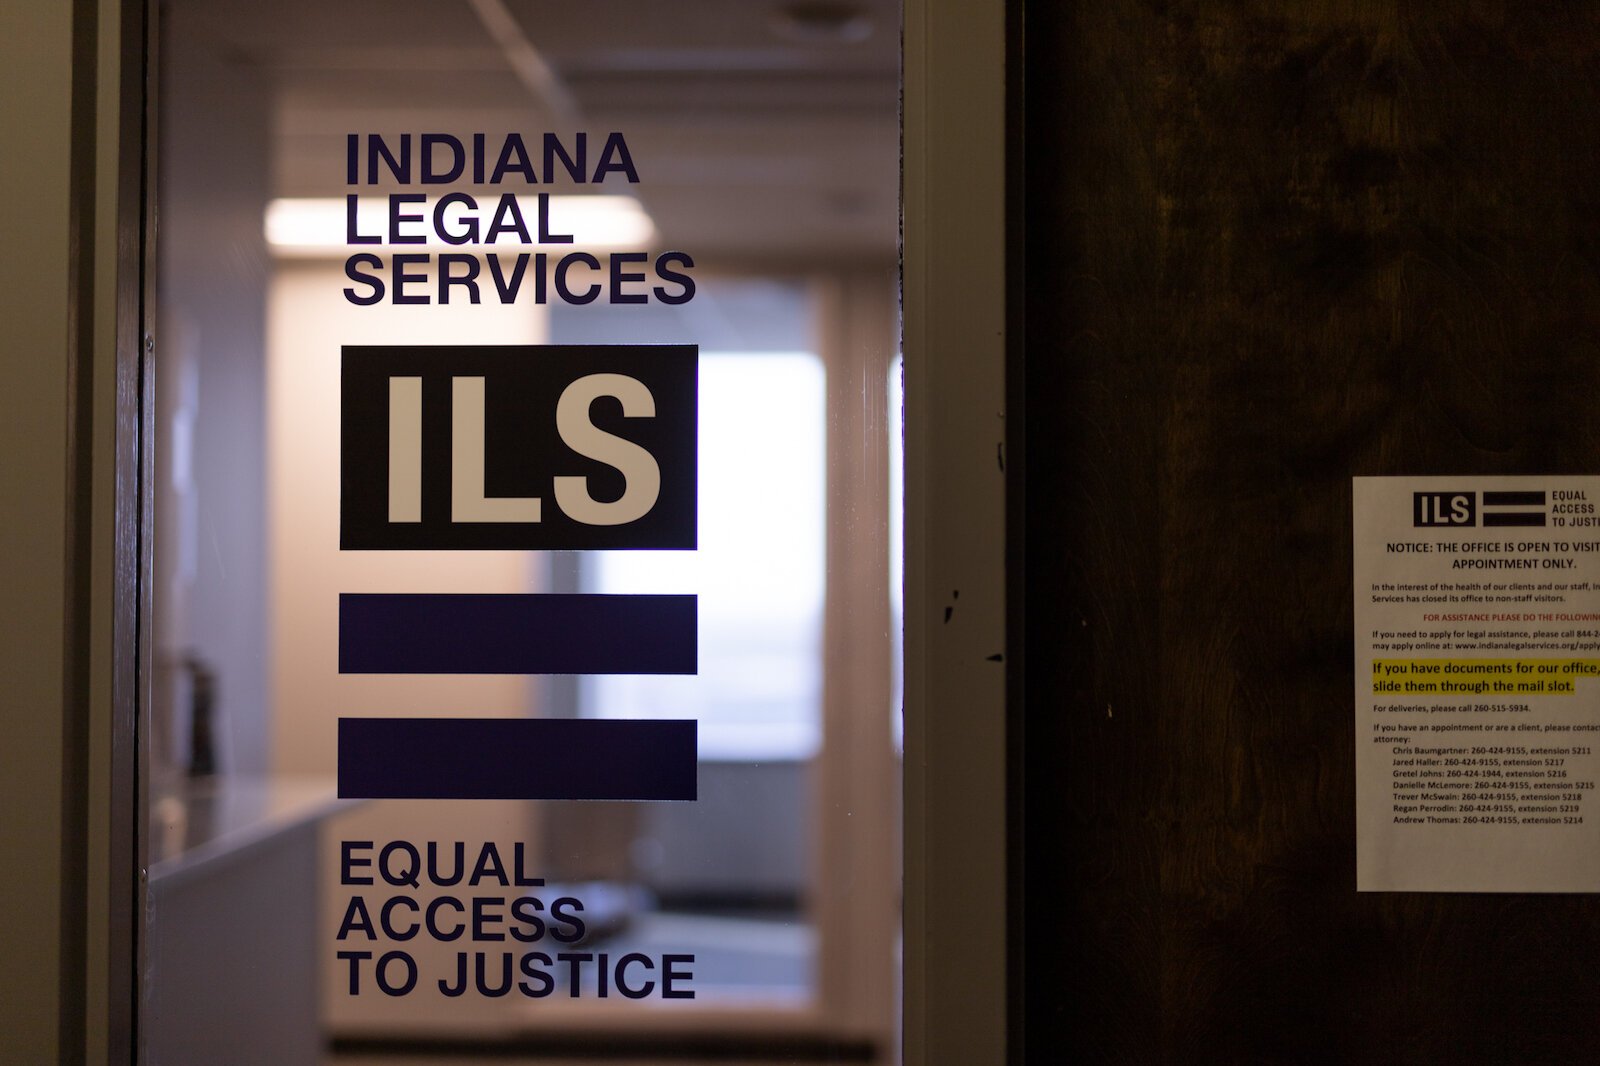 Indiana Legal Services, Inc. (ILS) is a nonprofit law firm that provides free civil legal assistance to eligible low-income residents throughout the state of Indiana.